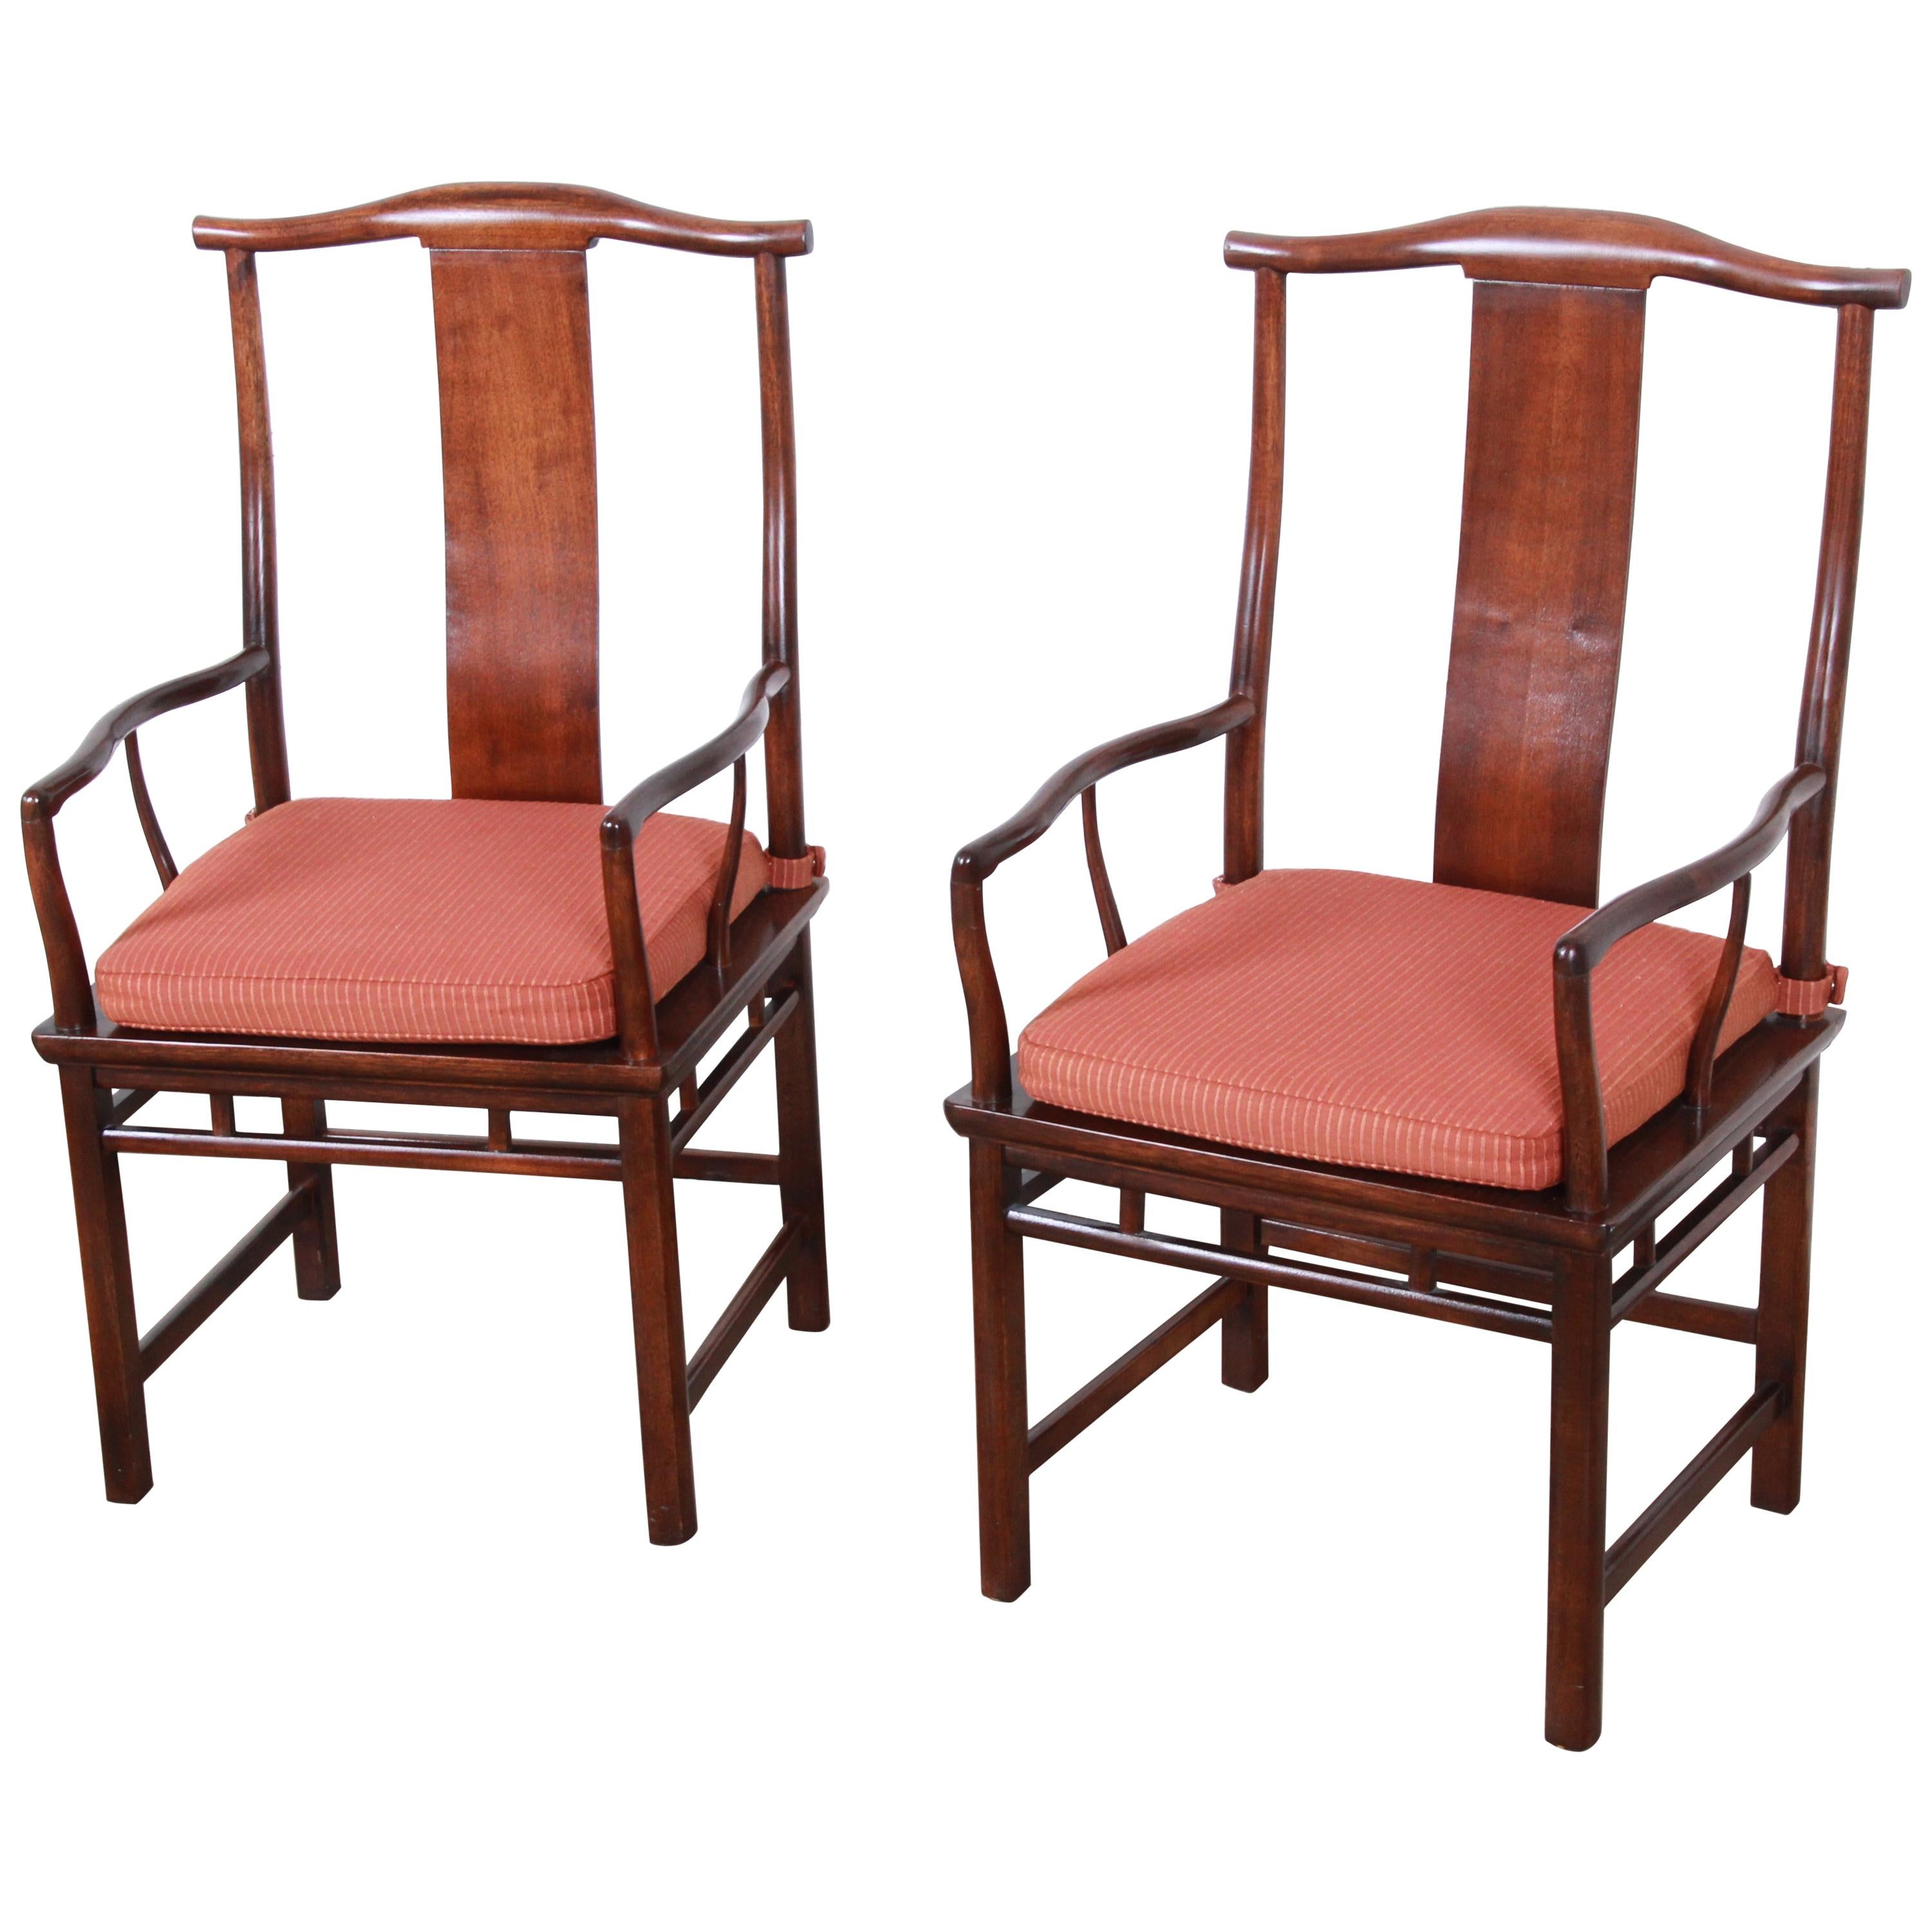 Michael Taylor for Baker Hollywood Regency Chinoiserie Walnut Armchairs, Pair